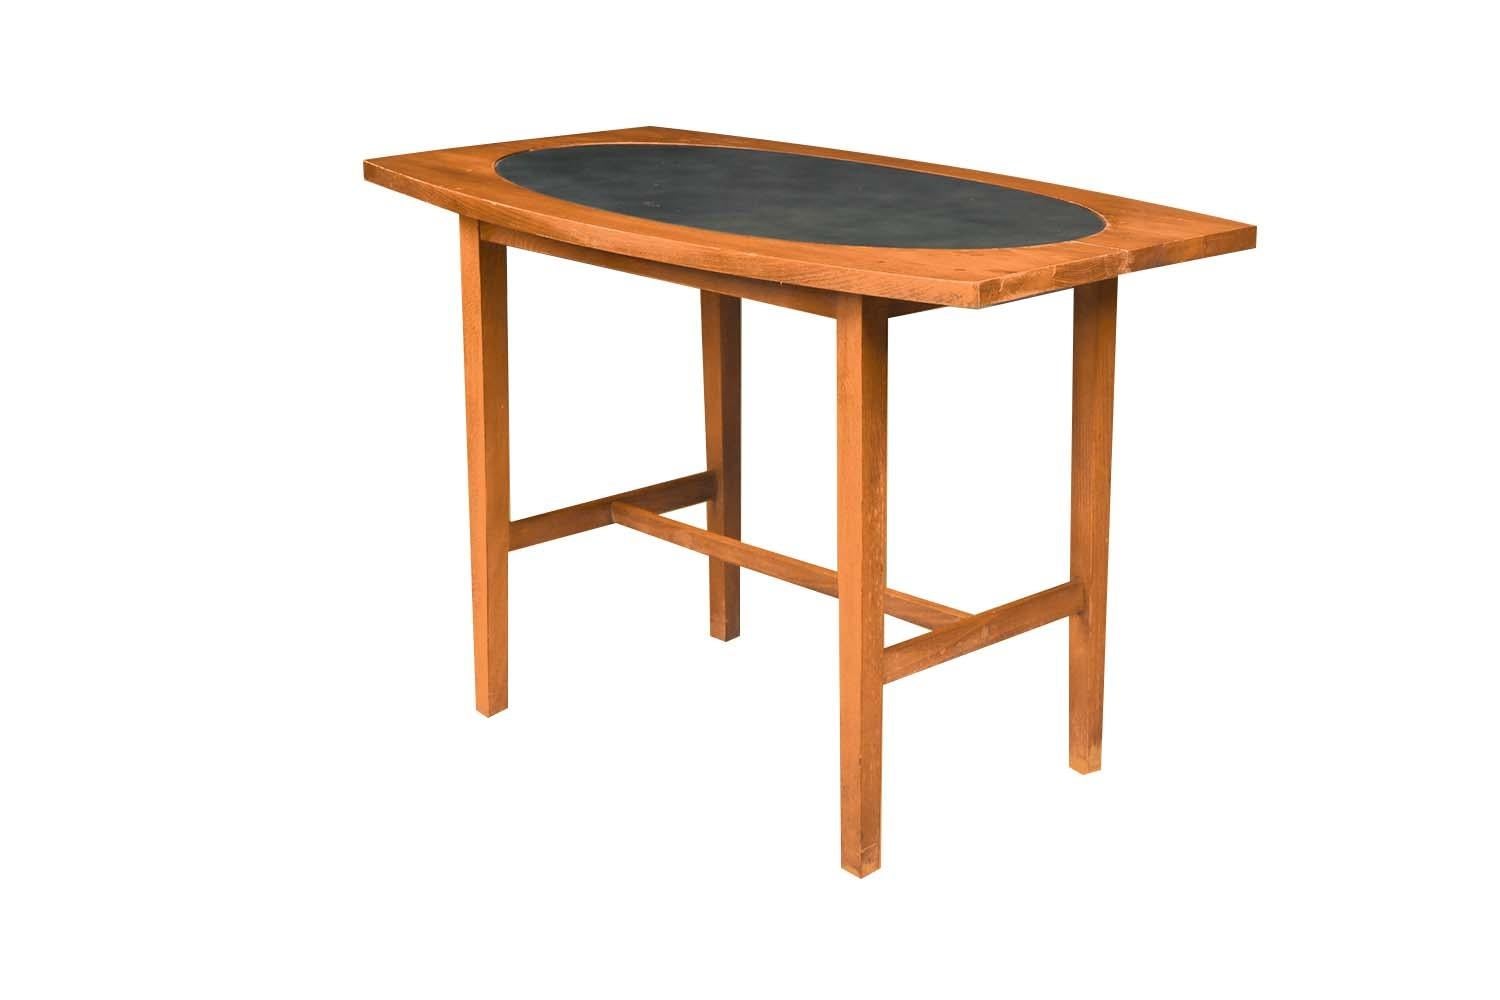 Spectacular 1960s rare mid-century end/ side table designed by Paul McCobb for Winchendon Furniture Company, 1960s 